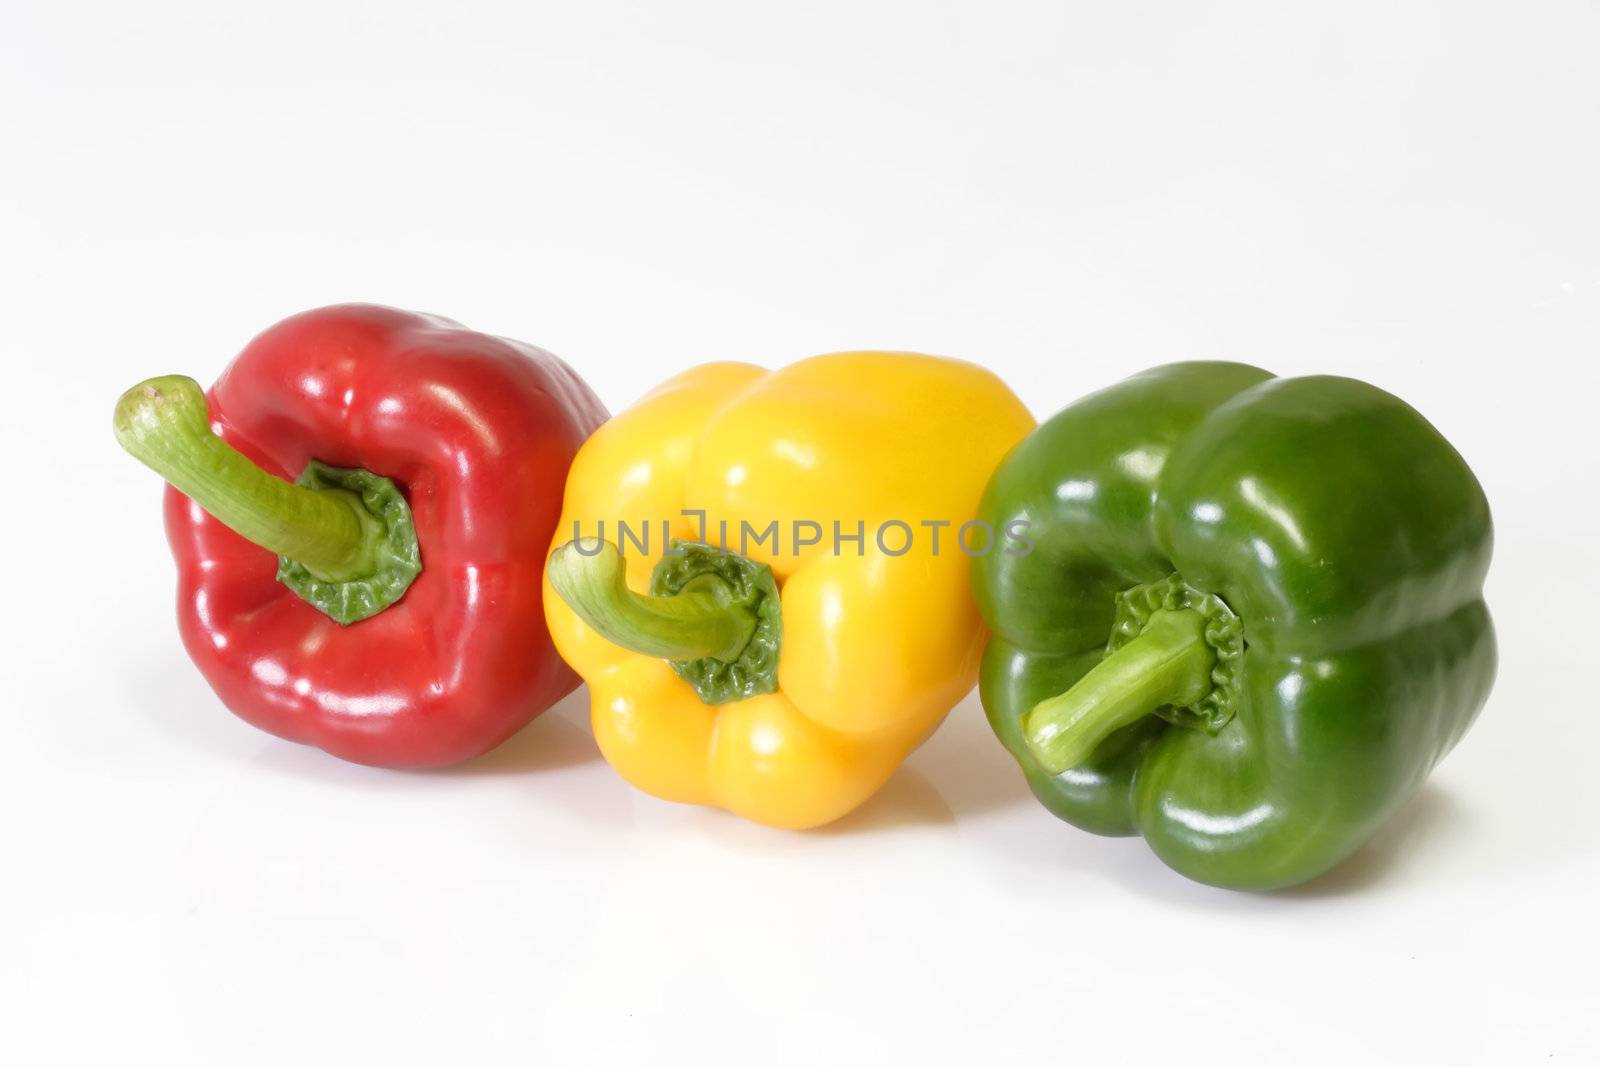 Colorful Peppers by Teamarbeit